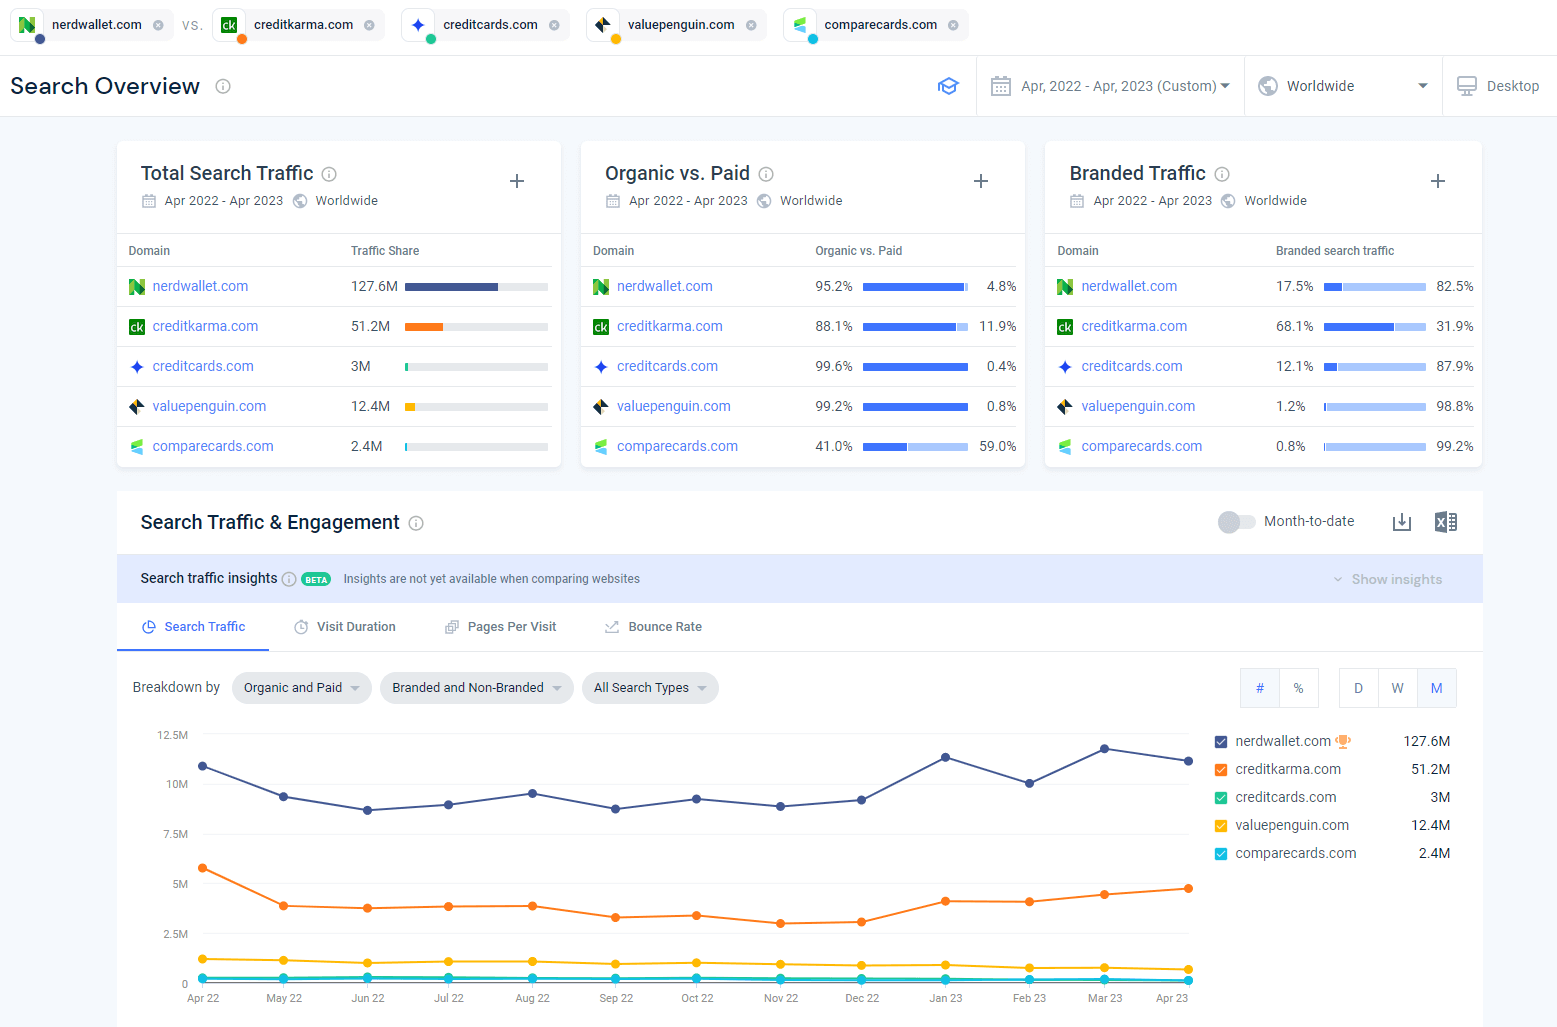 NerdWallet's Search Overview in comparison to its top four competitors worldwide.